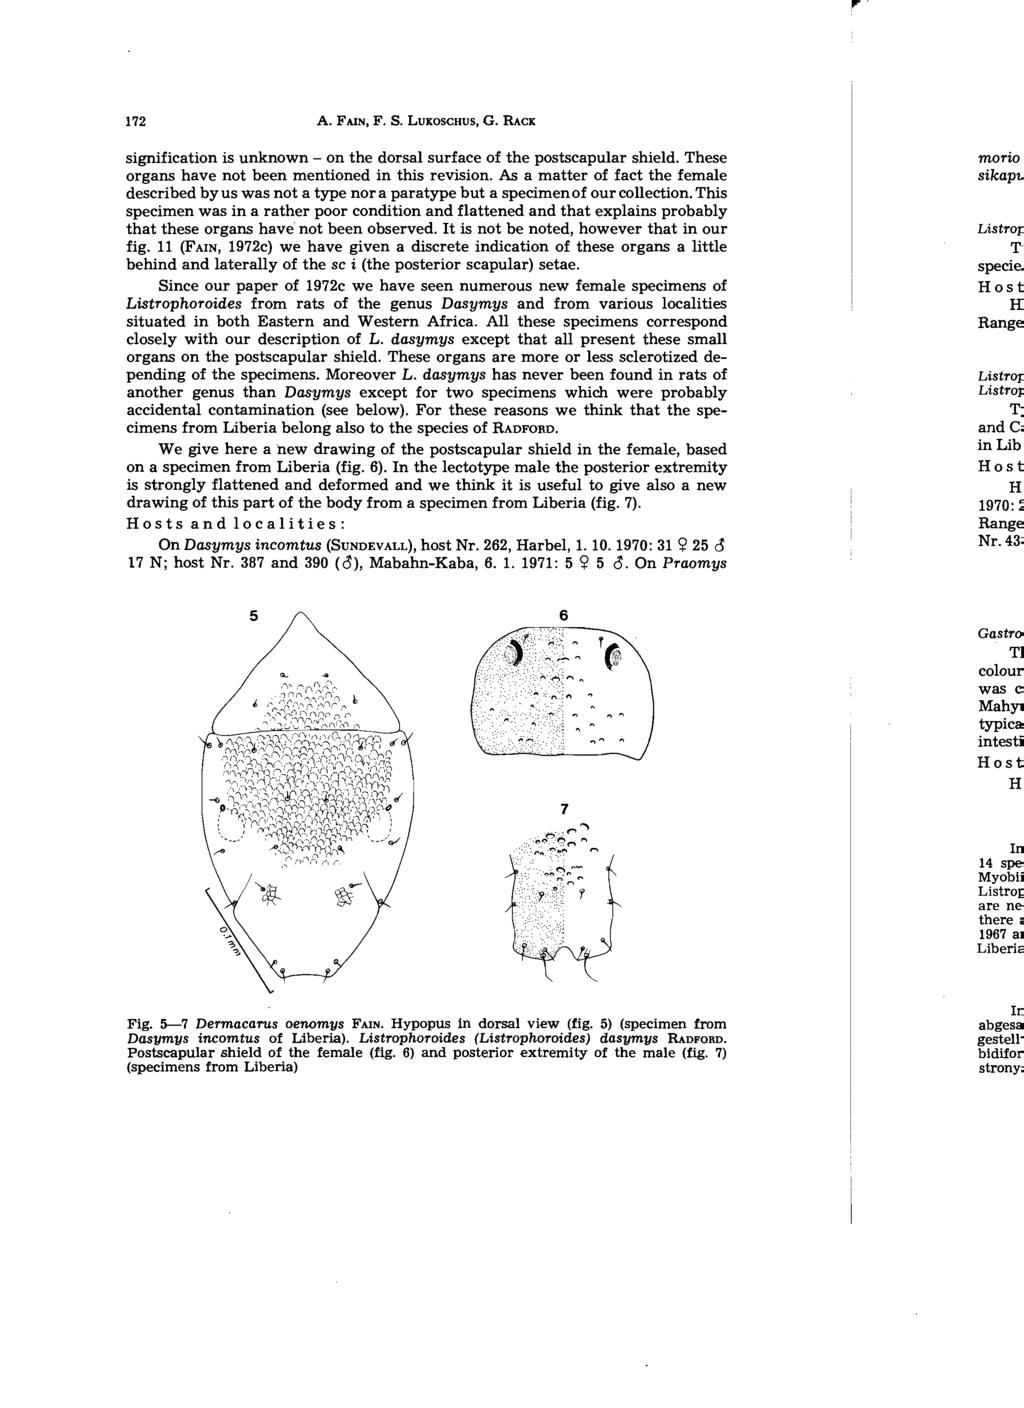 172 A. FAIN, F. S. LUKOSCHUS, G. RACK signification is unknown - on the dorsal surface of the postscapular shield. These organs have not been mentioned in this revision.